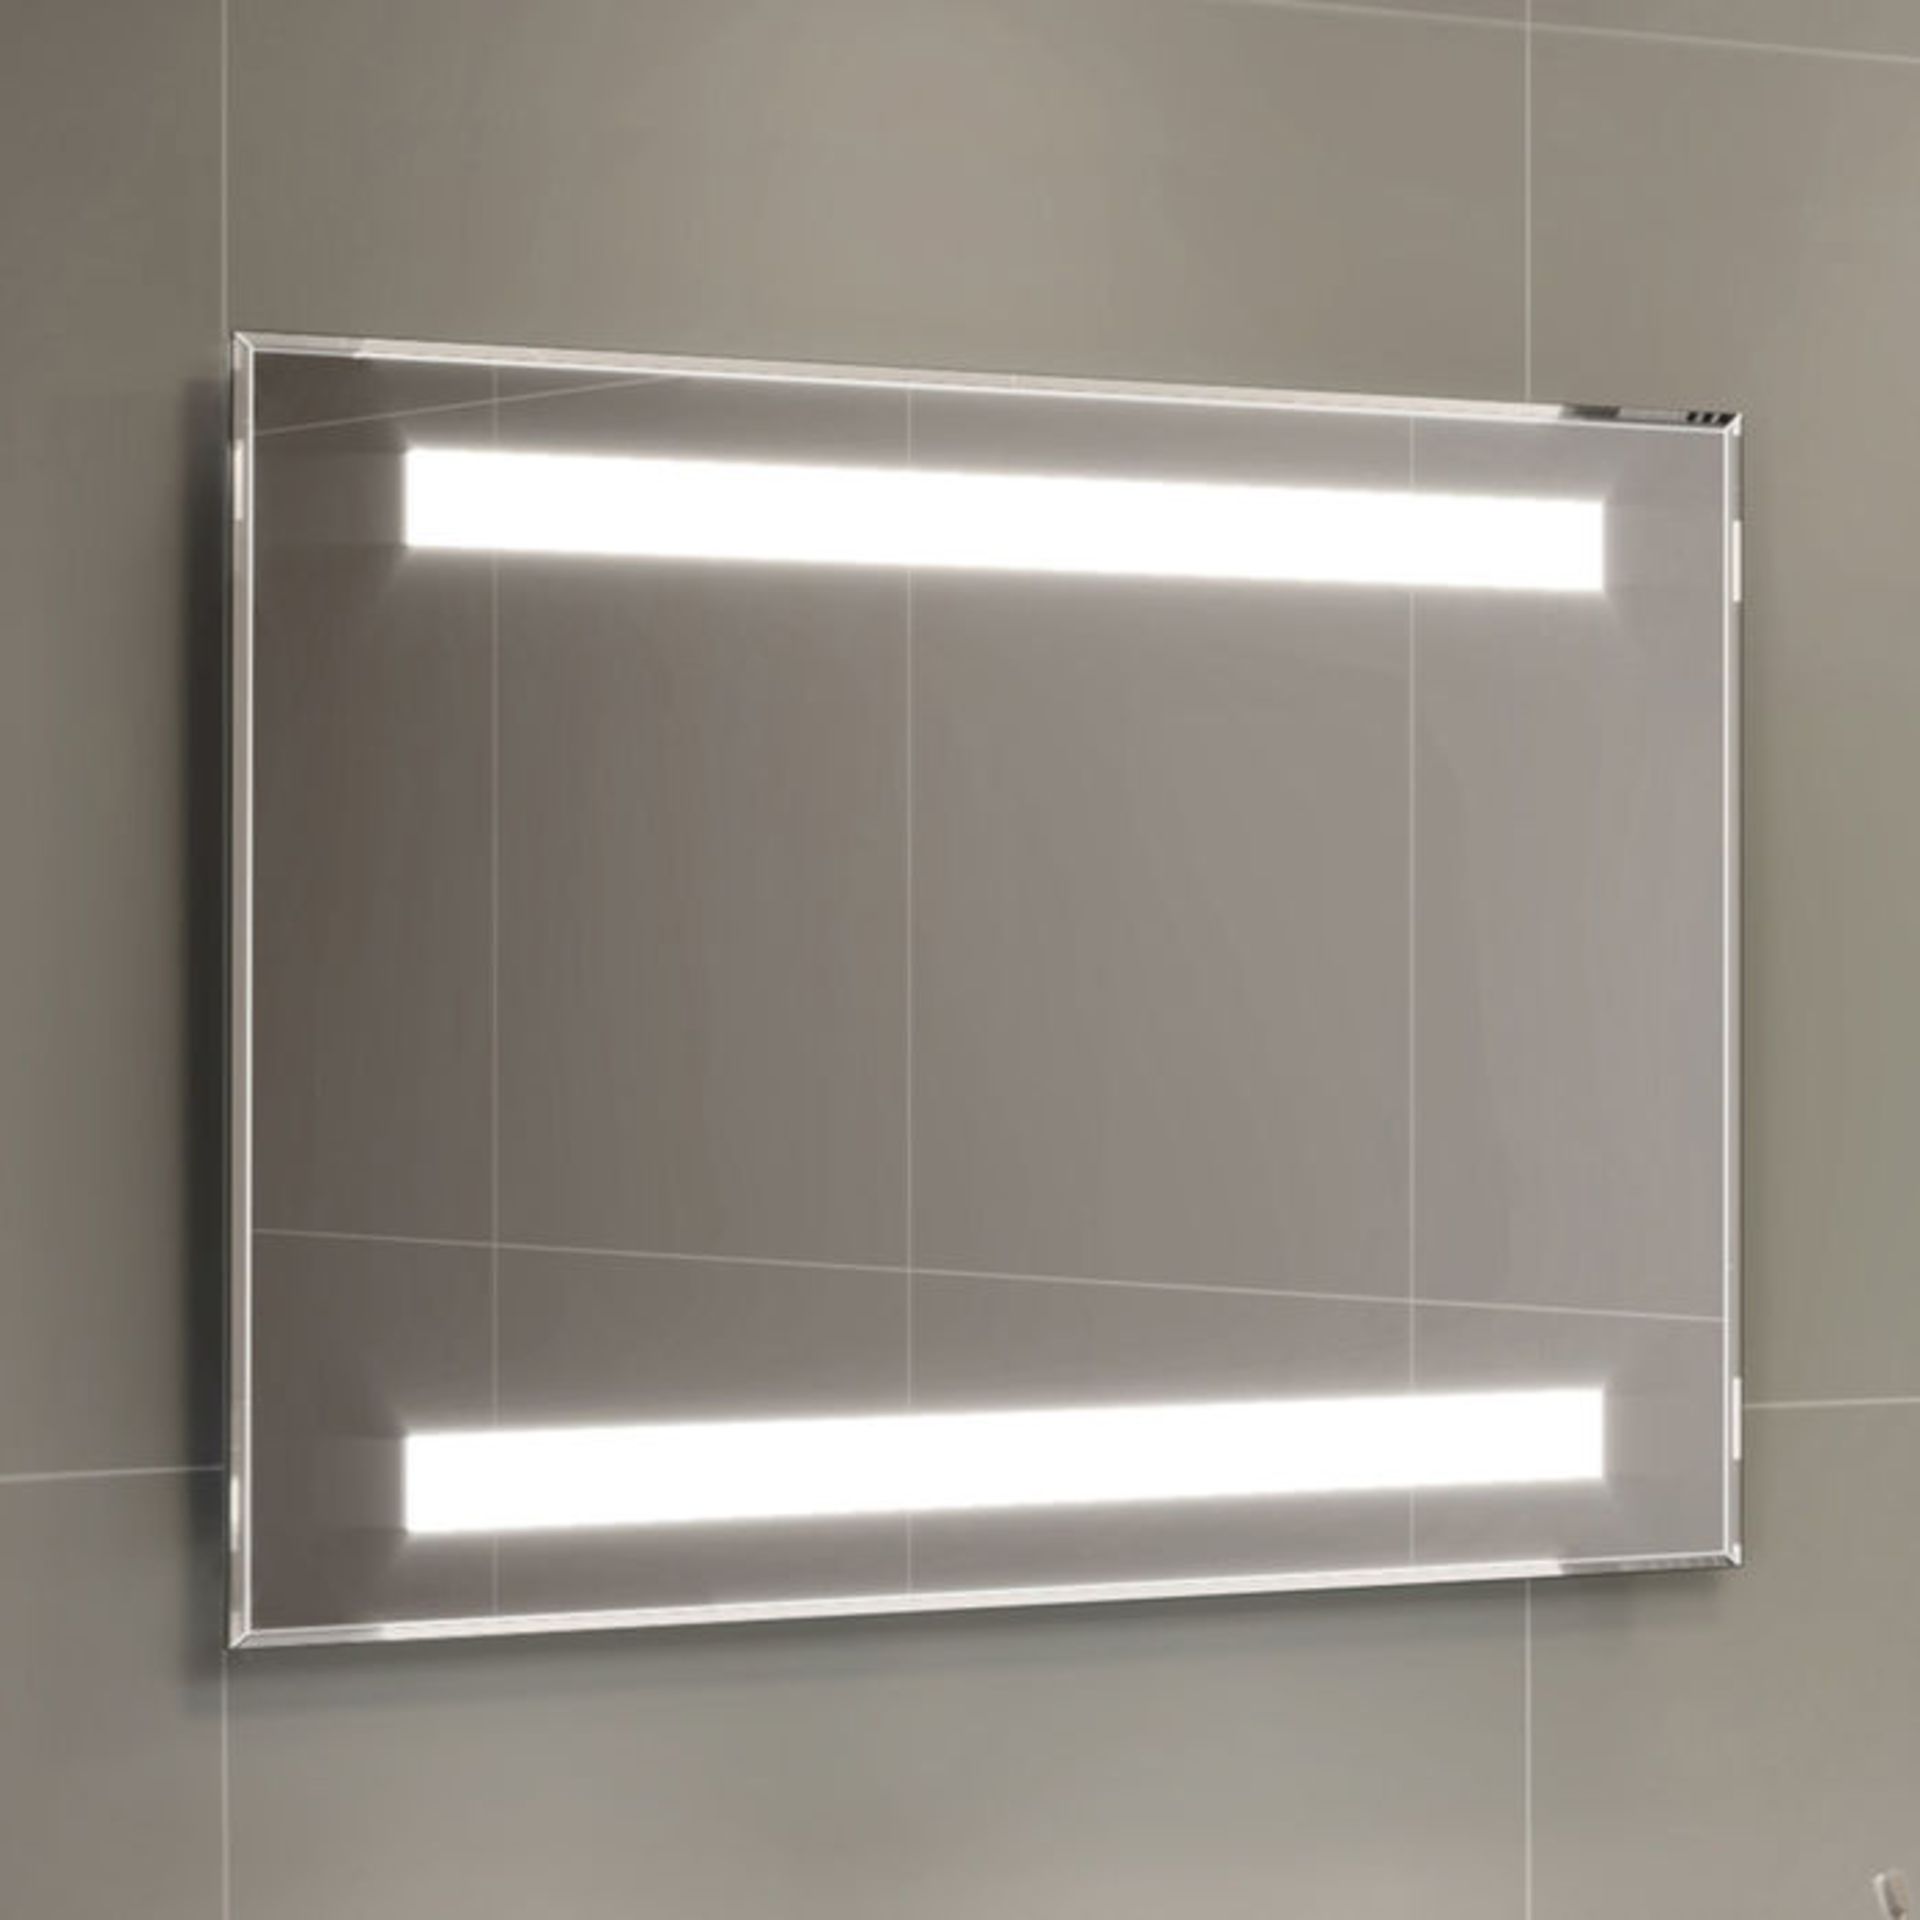 (V155) 500x700mm Omega LED Mirror - Battery Operated. Energy saving controlled On / Off switch - Bild 3 aus 3